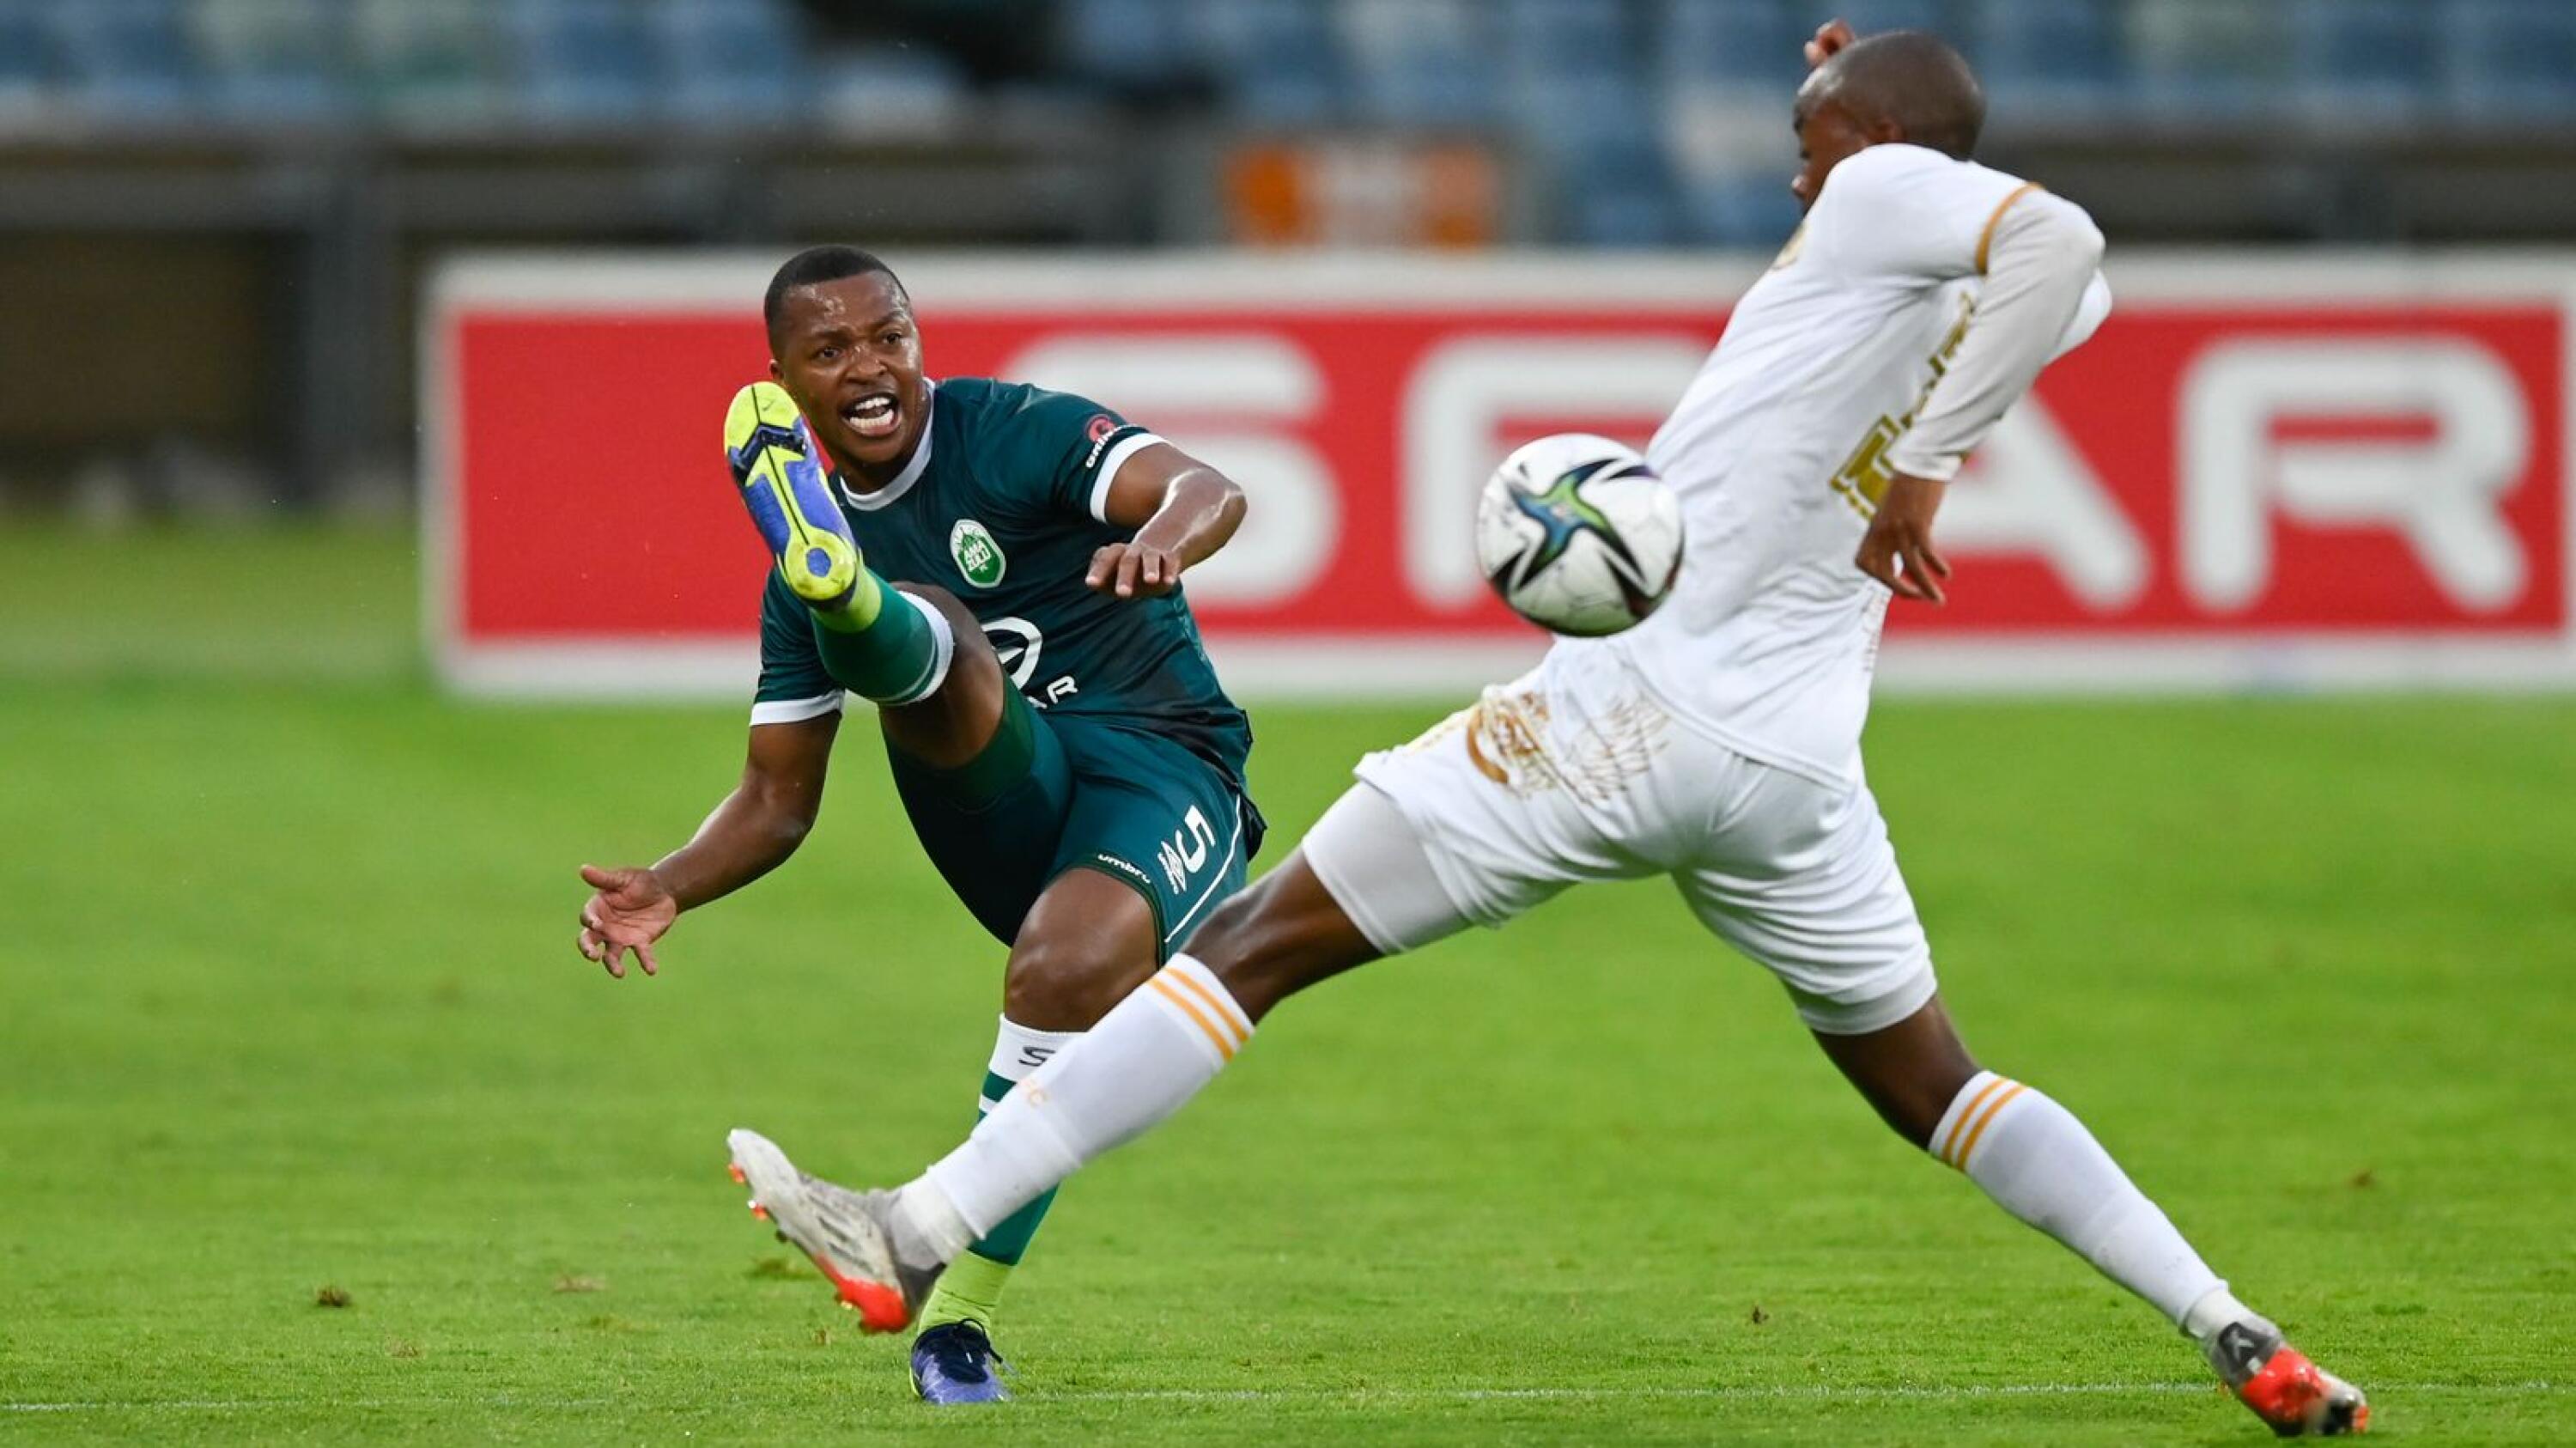 Thembela Sikhakhane of AmaZulu FC boots the ball past Levy Masiane of Royal AM FC during their DStv Premiership match at Moses Mabhida Stadium in Durban on Saturday